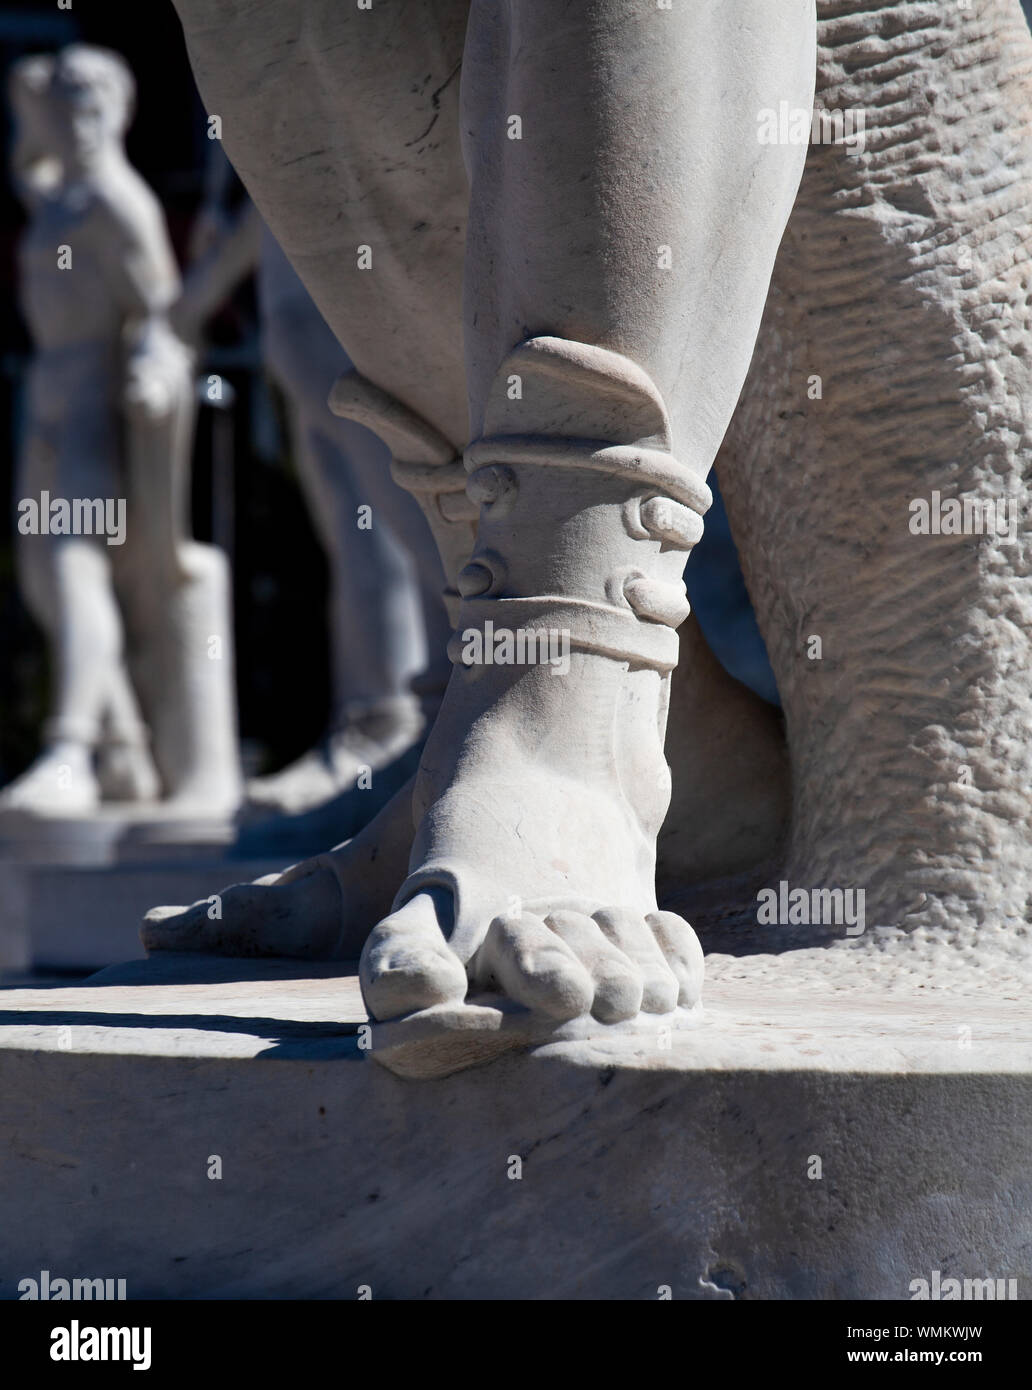 A detail of a statue in the Stadio dei Marmi in Rome showing the foot ...